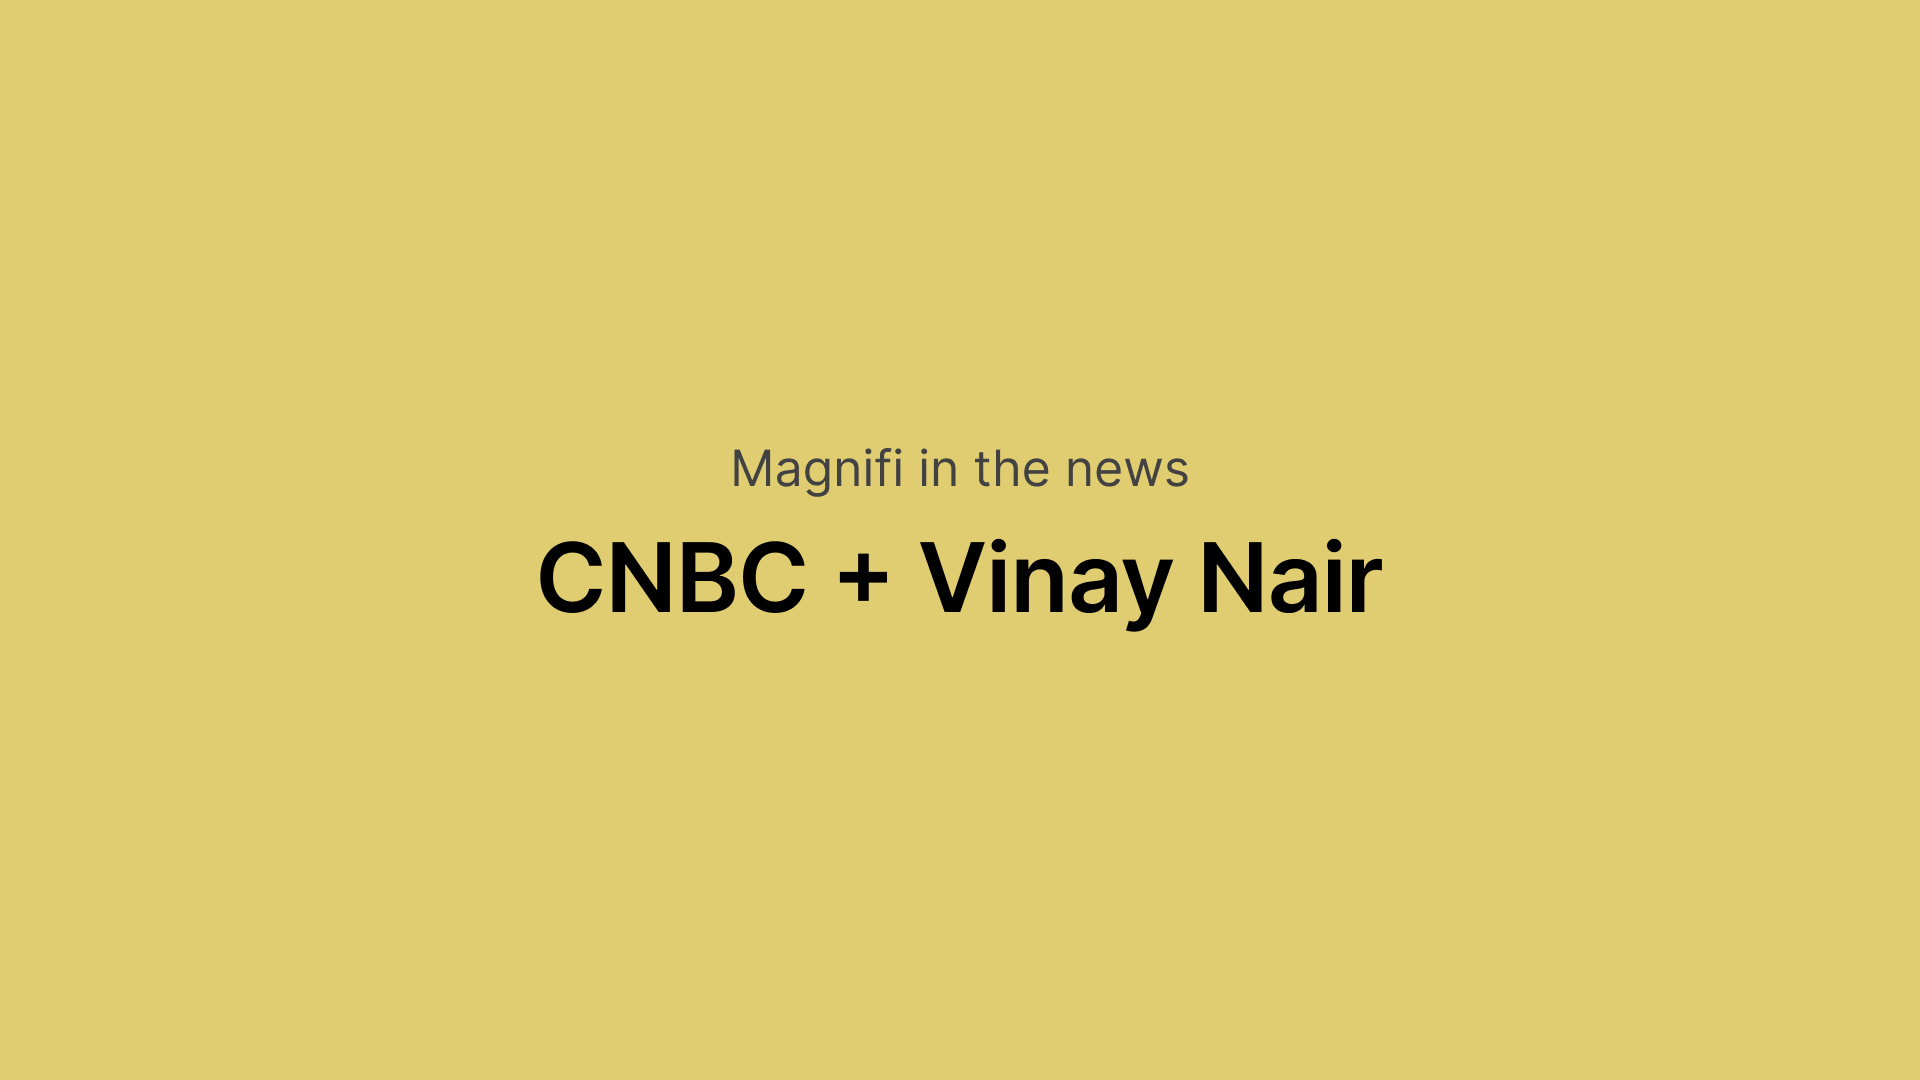 Magnifi in the news: CNBC and Vinay Nair